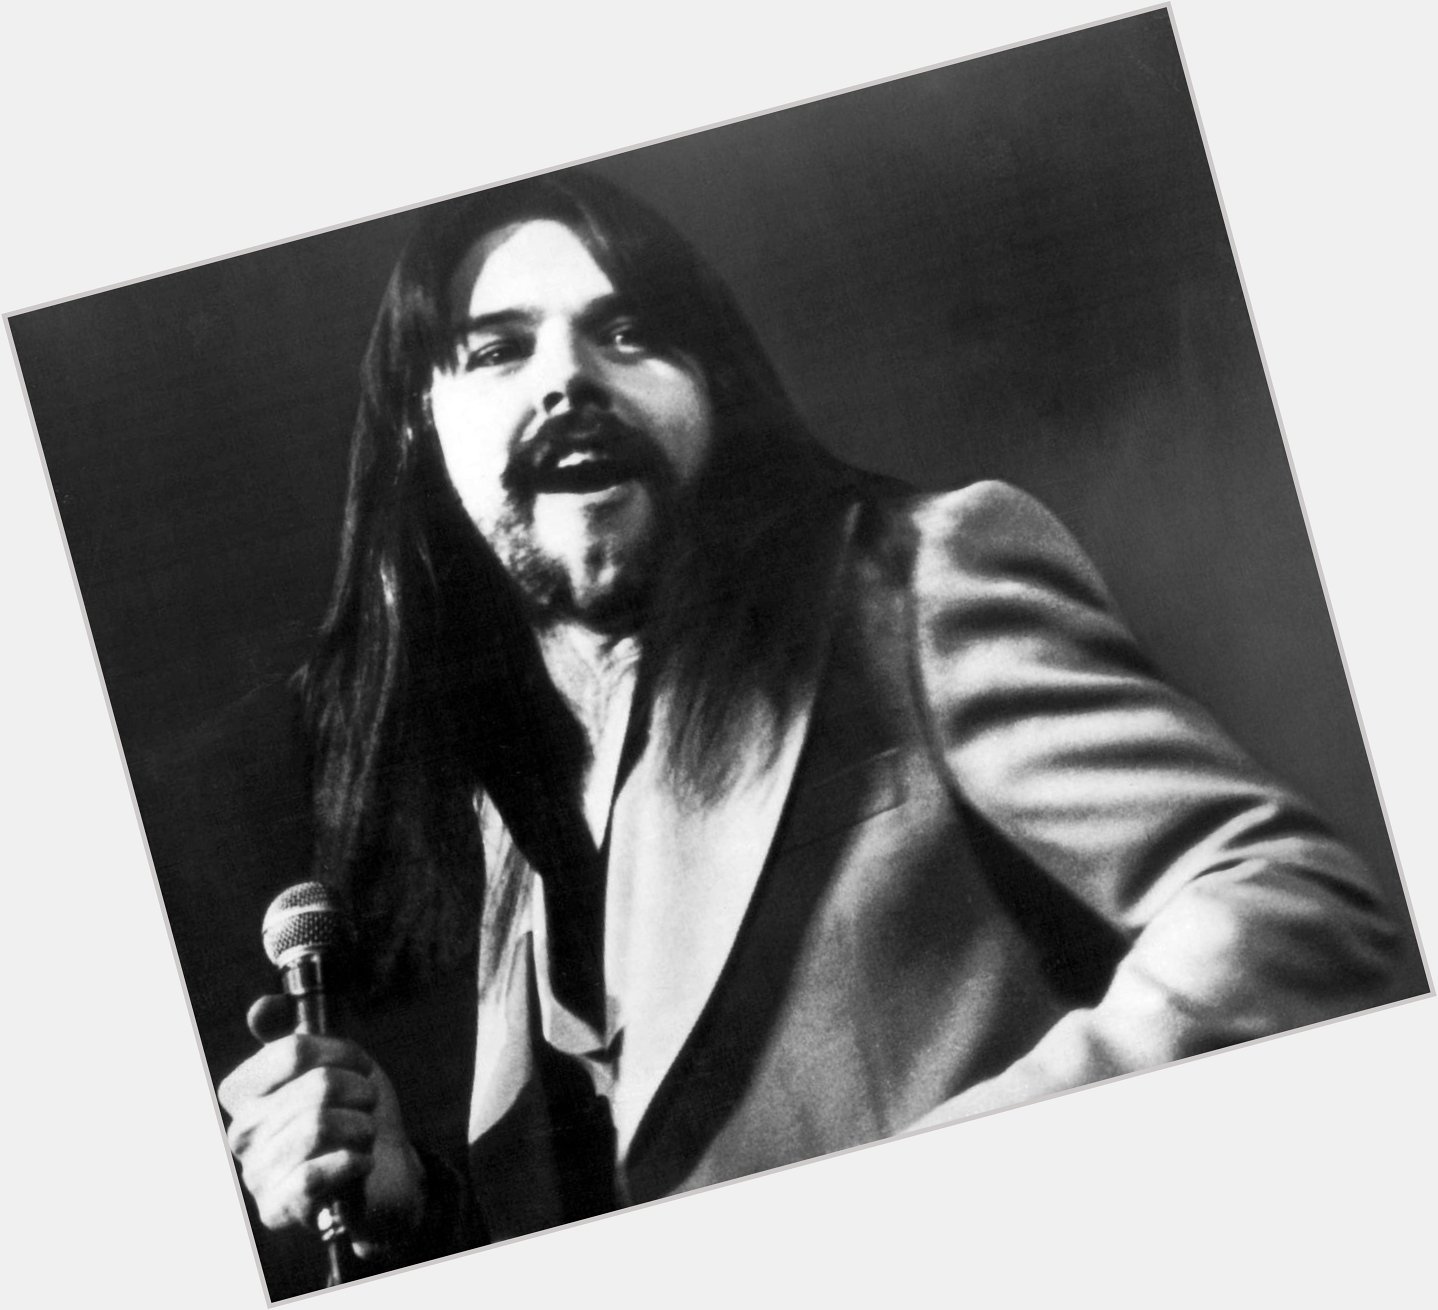 Happy Birthday to Bob Seger!
What\s your favorite Seger tune? 